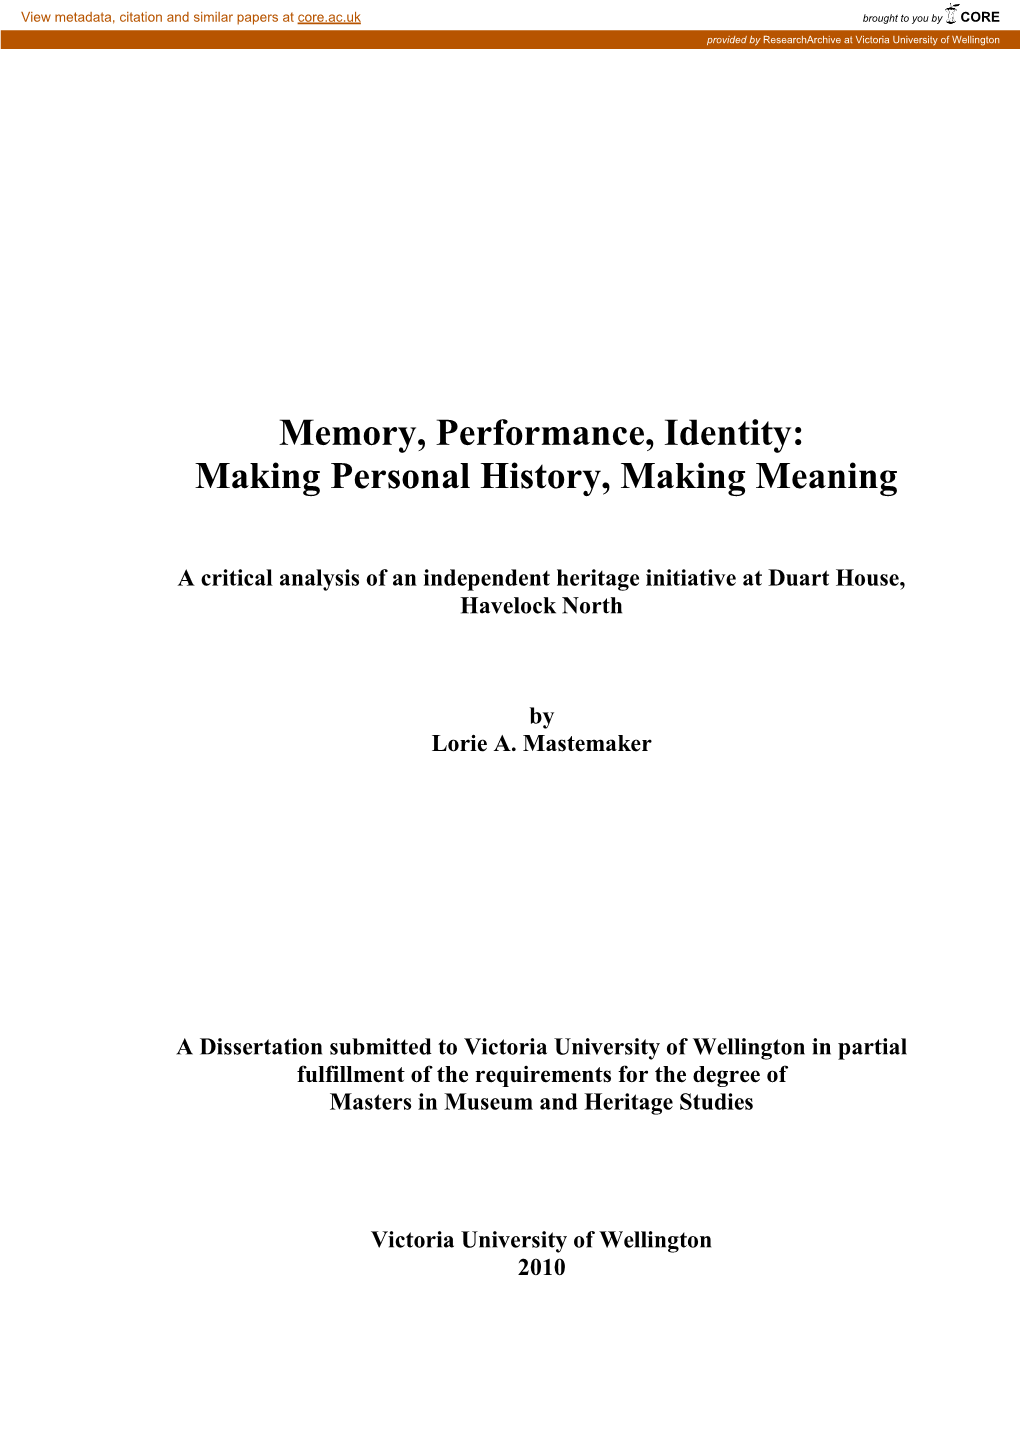 Memory, Performance, Identity: Making Personal History, Making Meaning